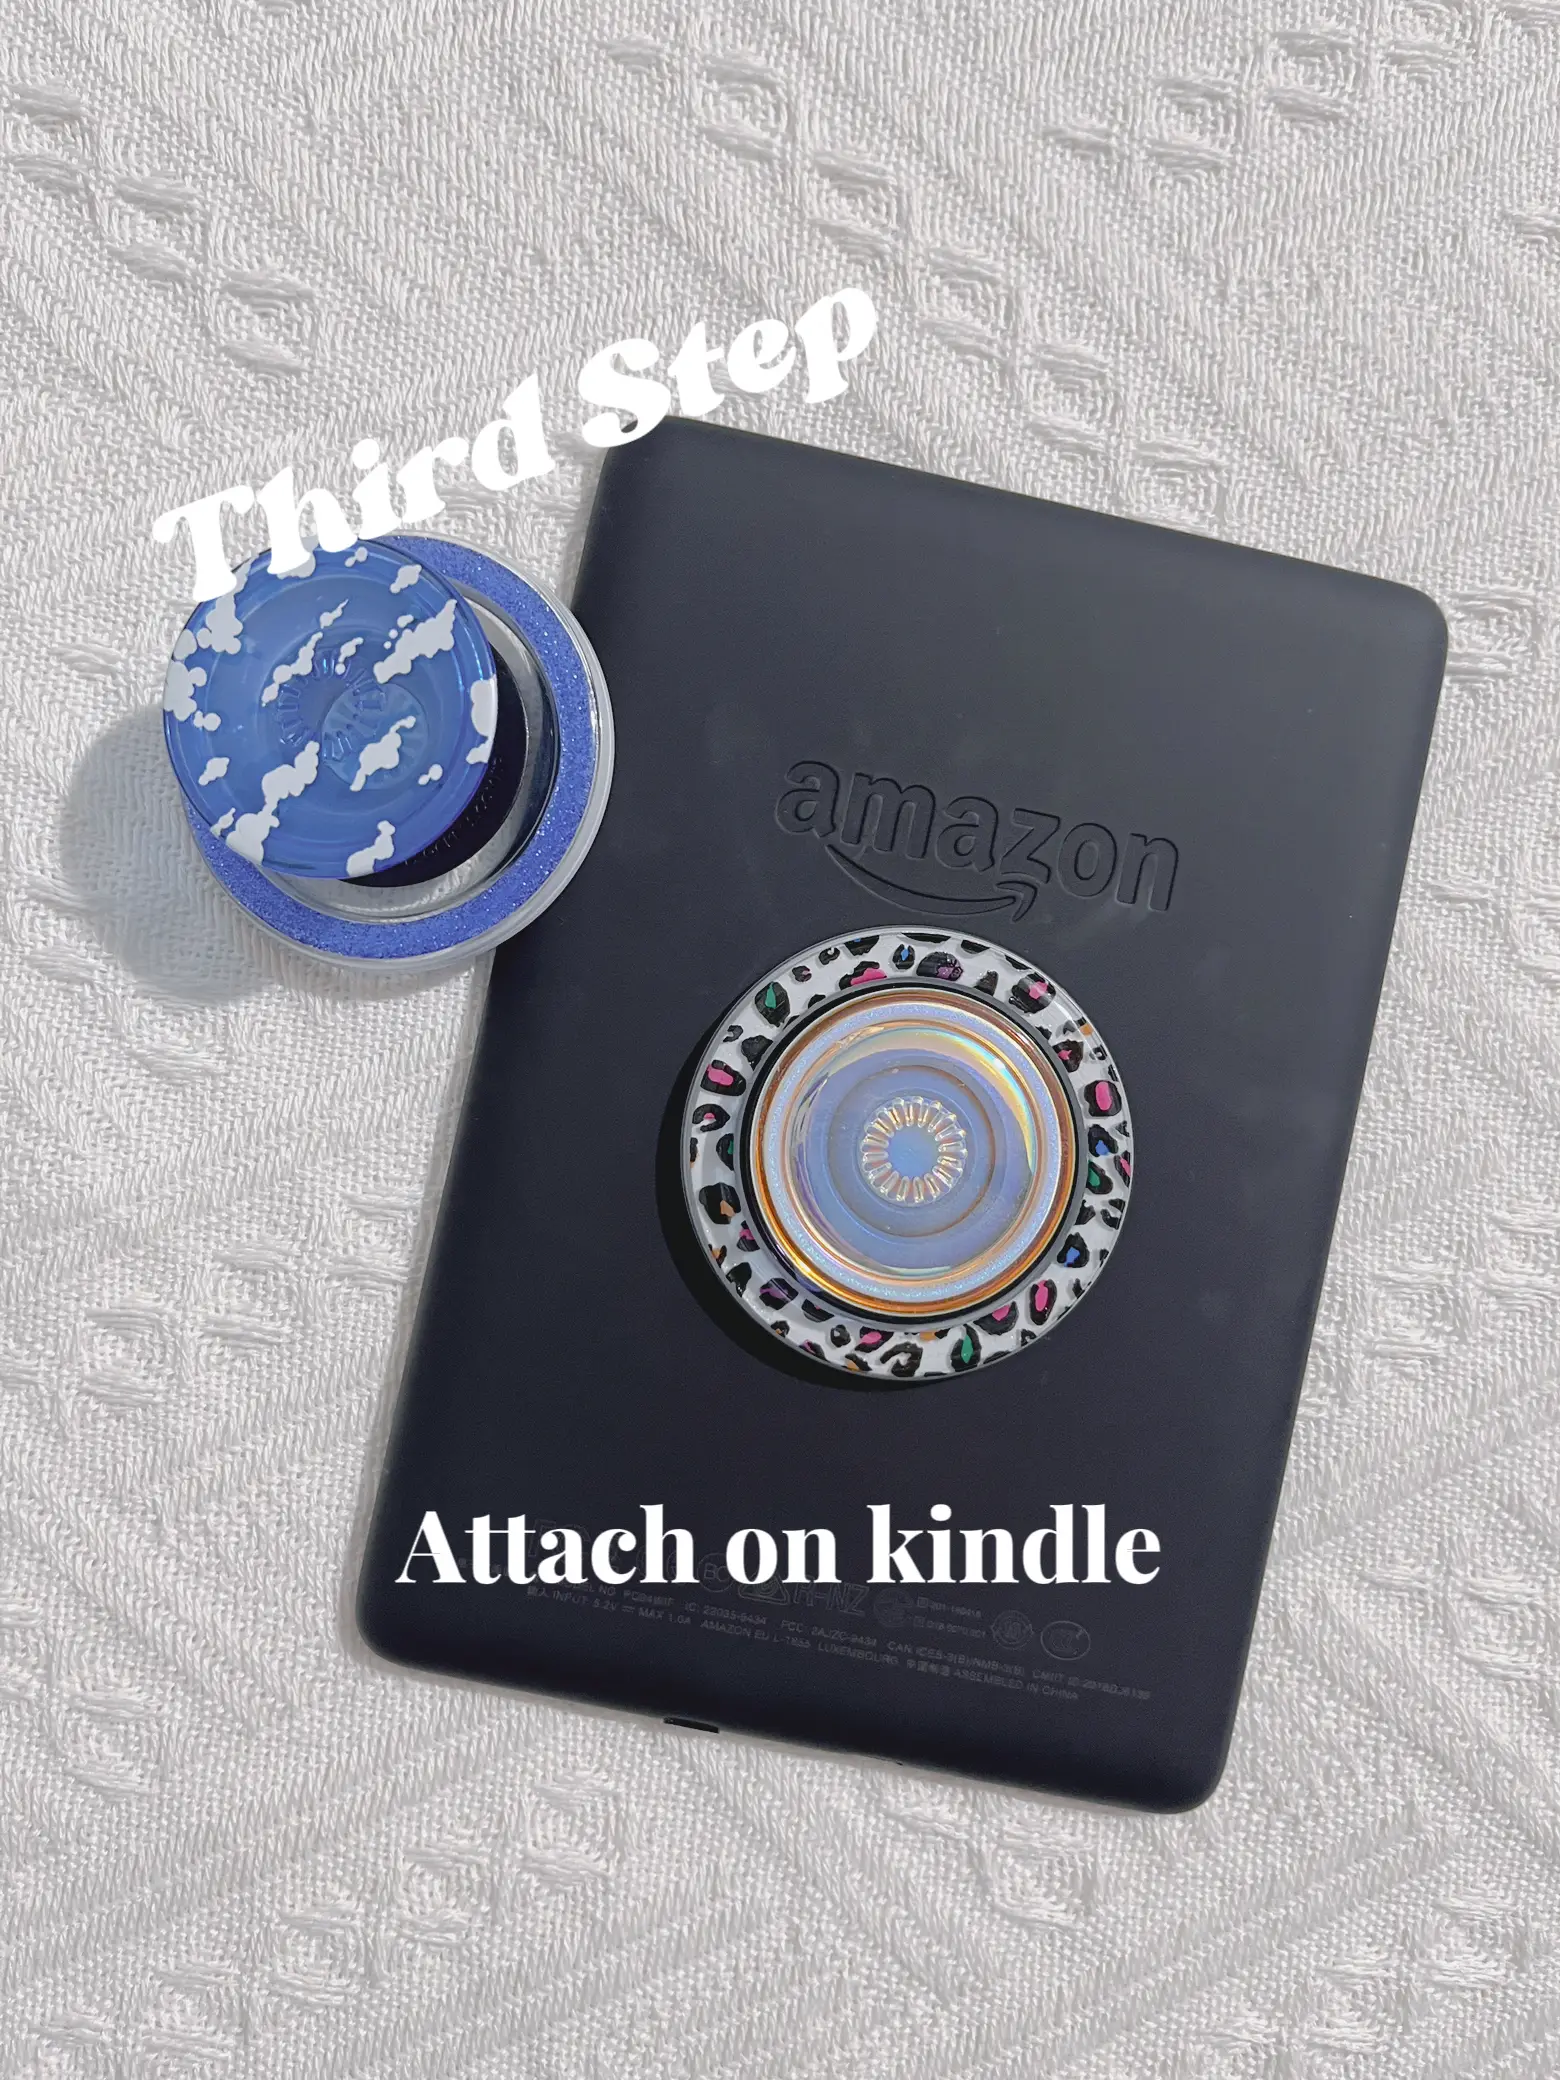 Add a pop socket to your kindle. It makes it easier to hold.